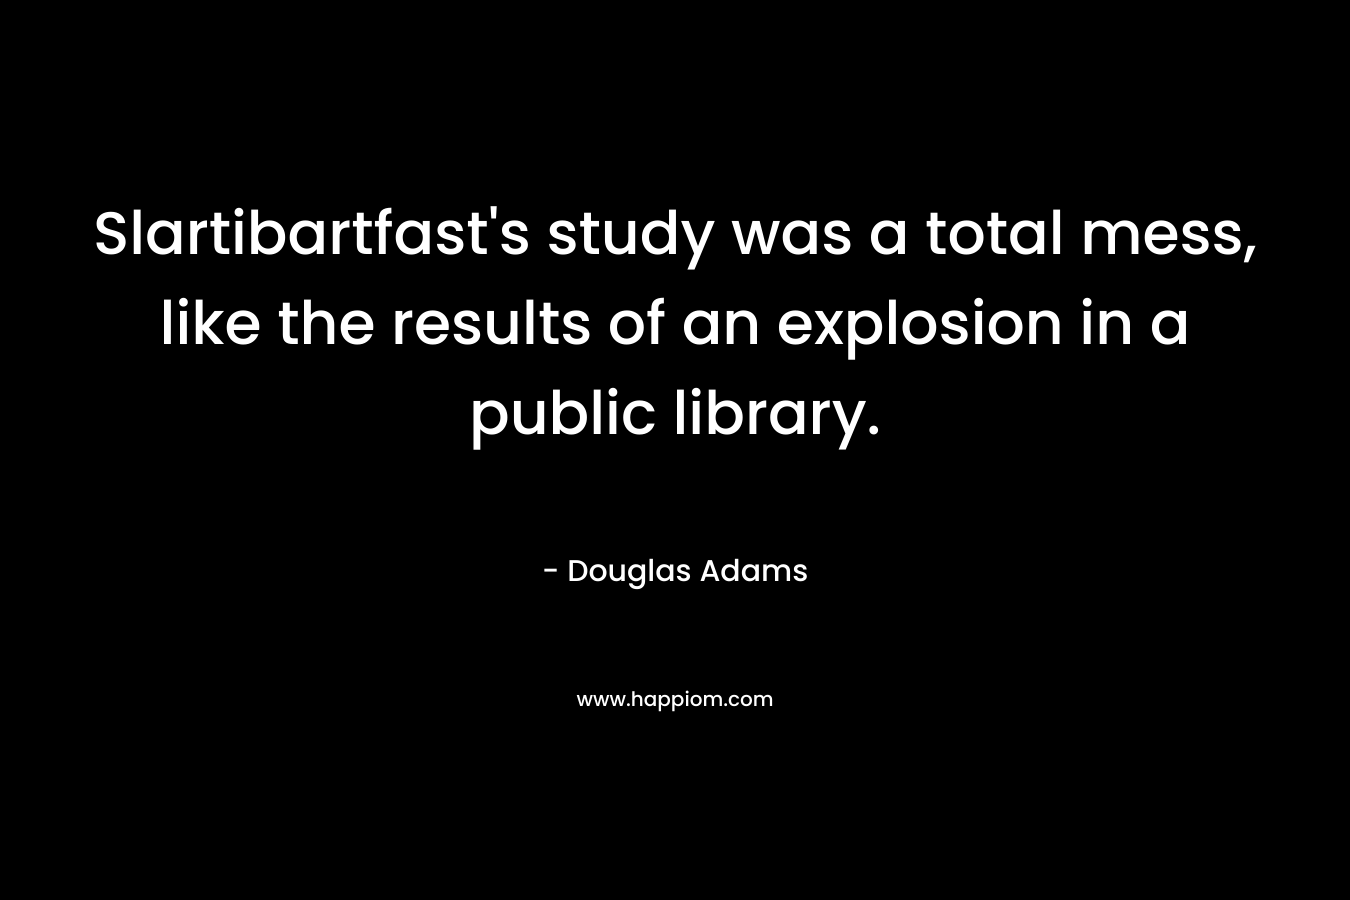 Slartibartfast’s study was a total mess, like the results of an explosion in a public library. – Douglas Adams